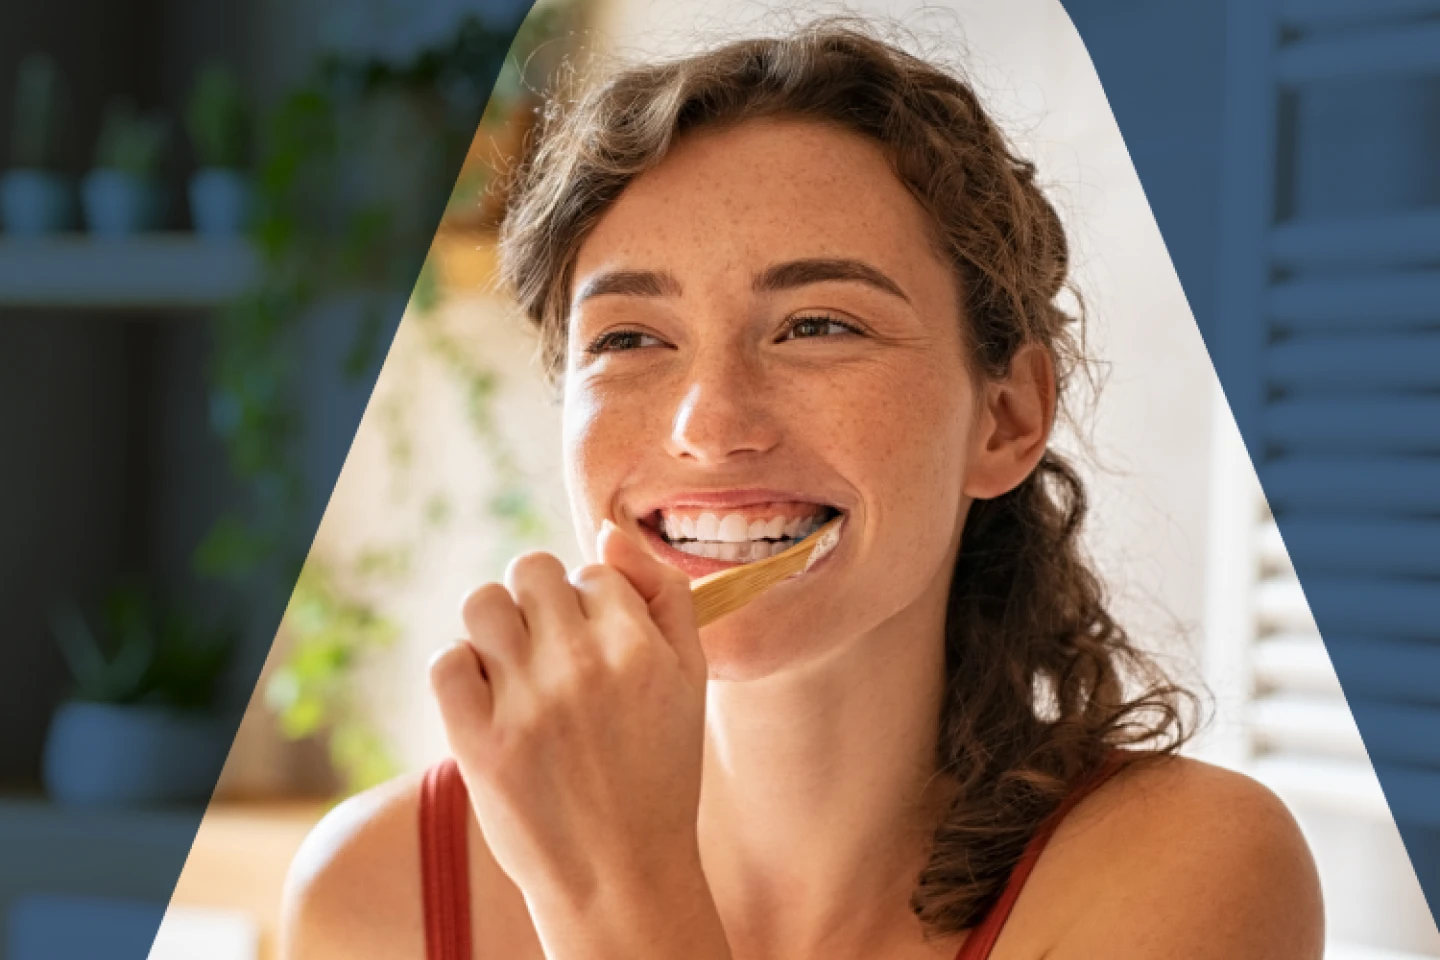 A woman brushing teeth to prevent common dental issues such as cavities, gum redness, plaque buildup, and misaligned teeth, highlighting the importance of oral hygiene and regular dental check-ups.